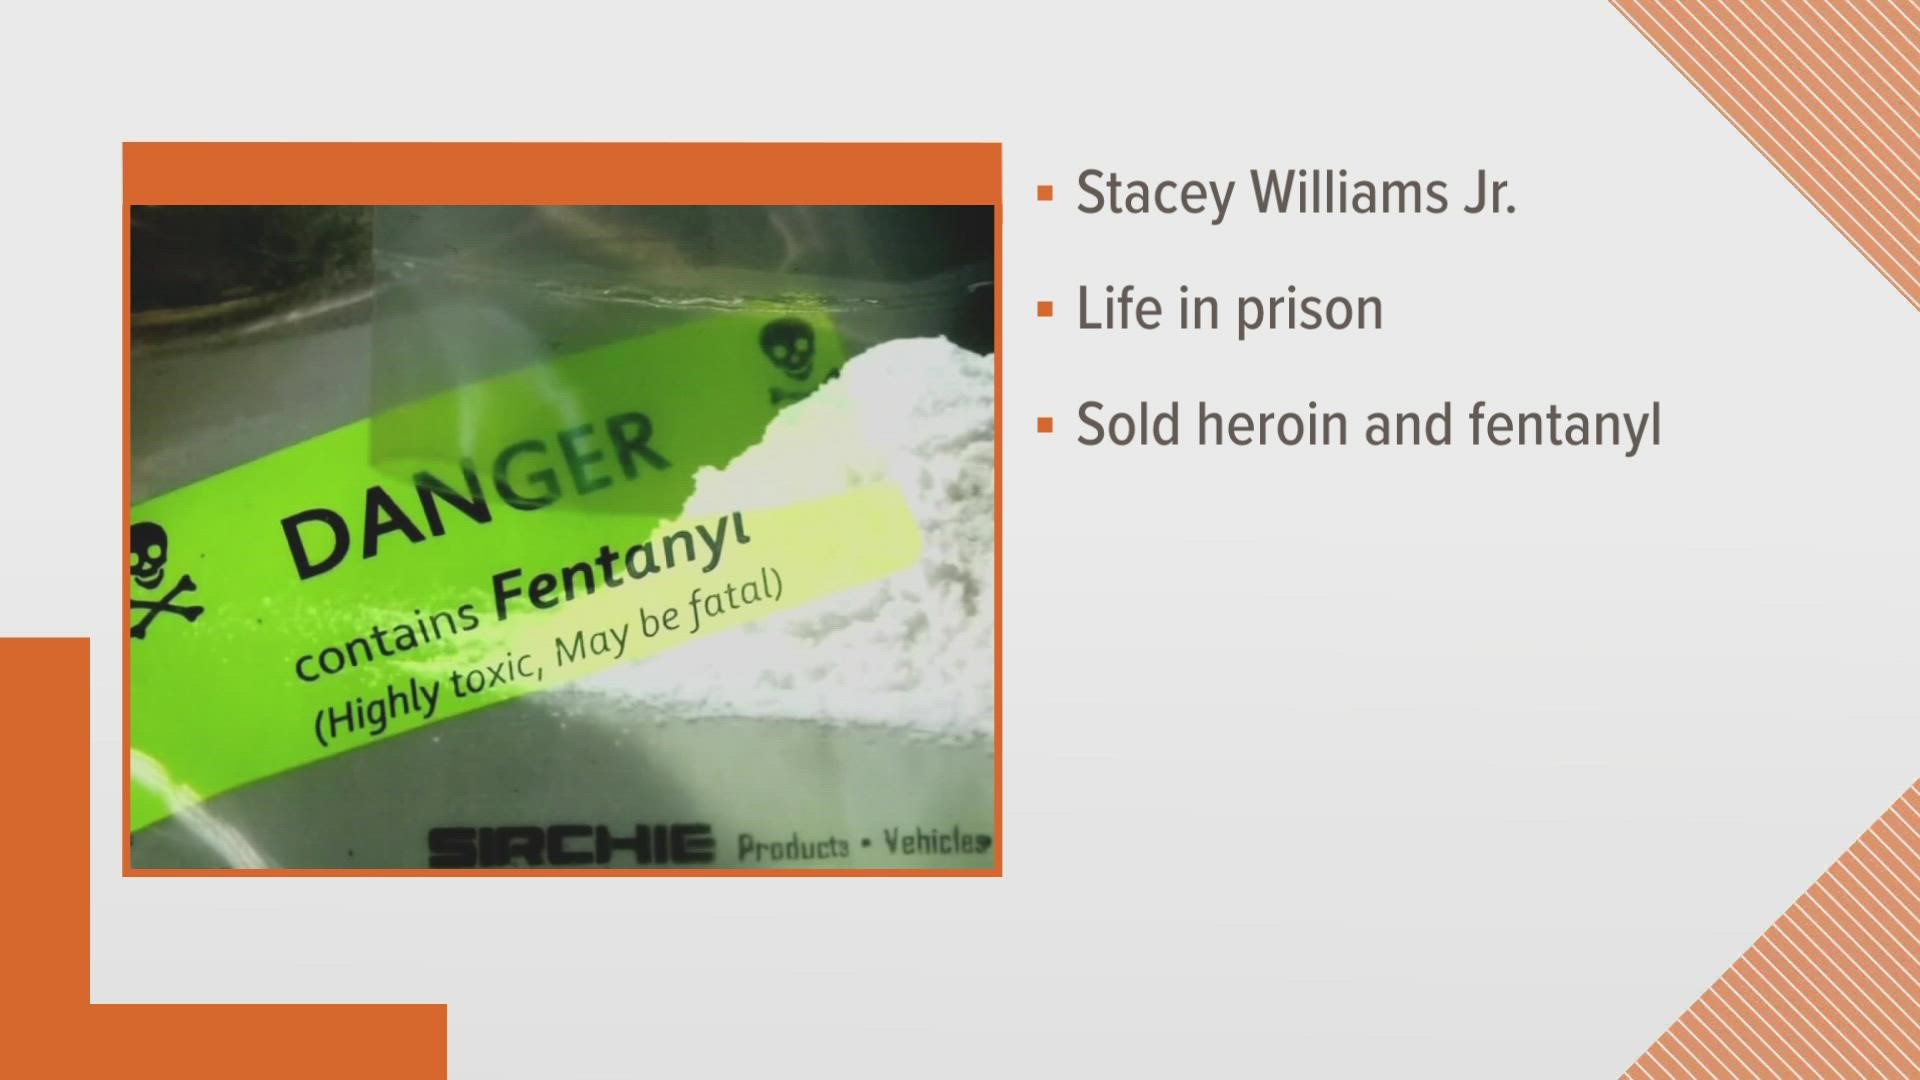 One of the men Stacey Williams sold drugs to overdosed and died.